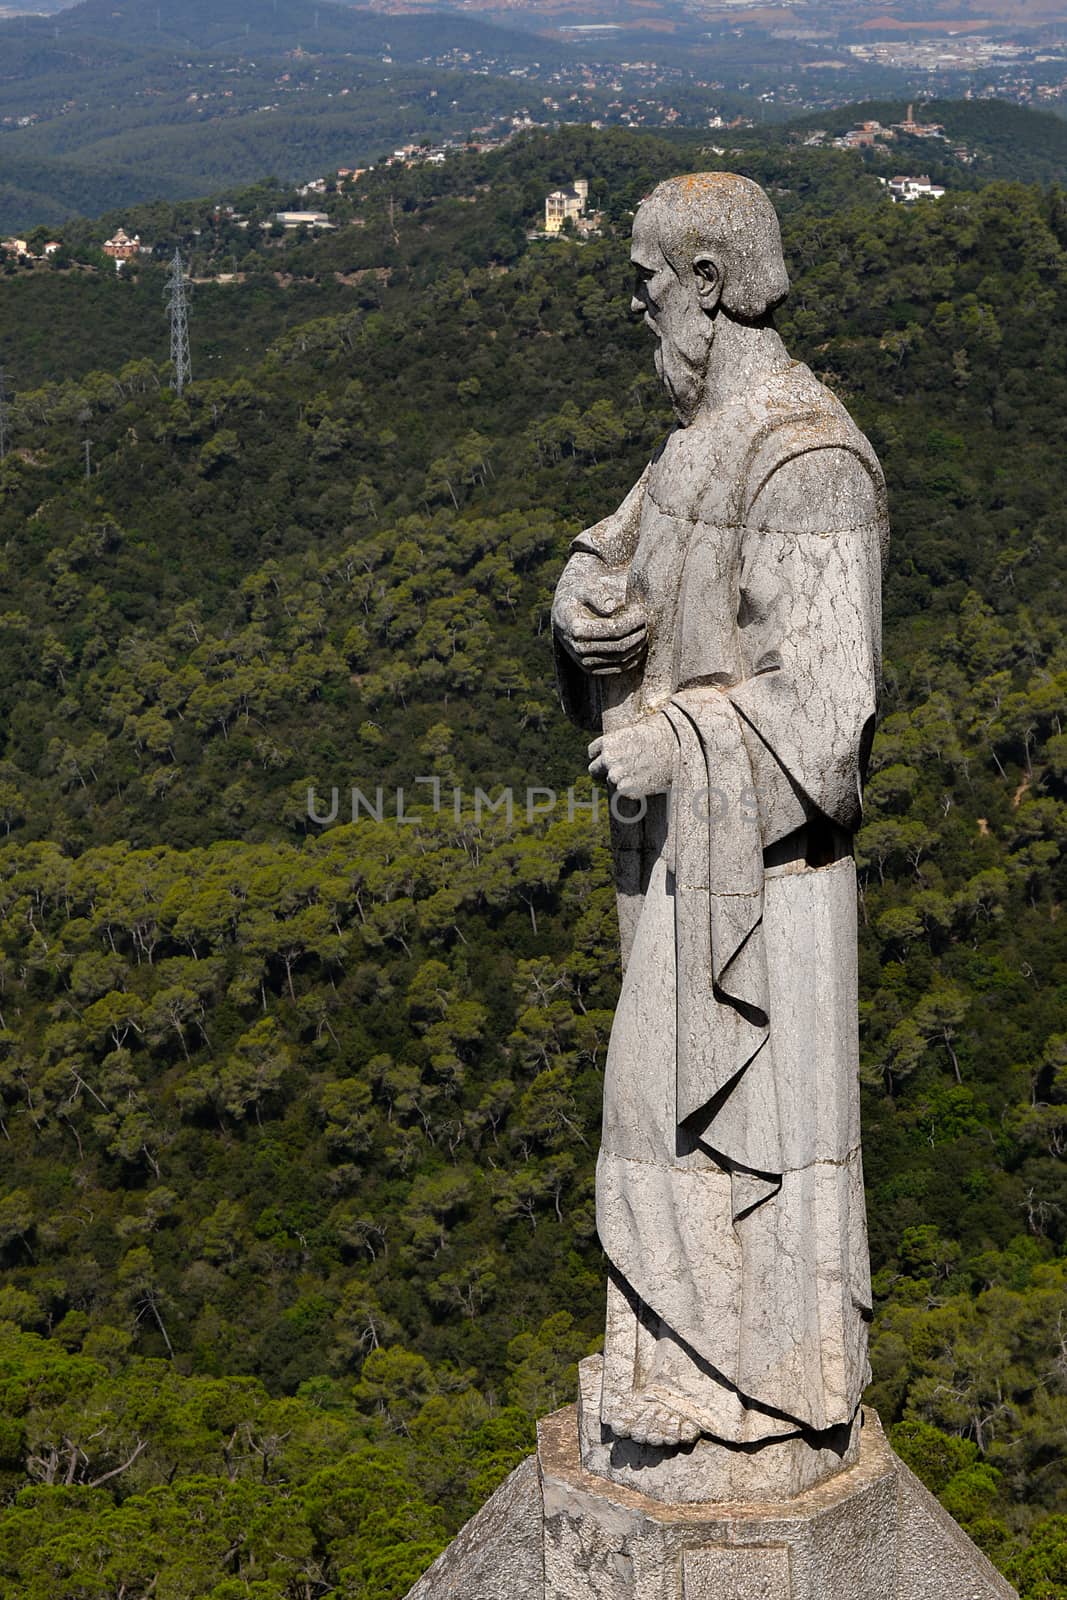 The statue on the tower of the Church of the Sacred Heart